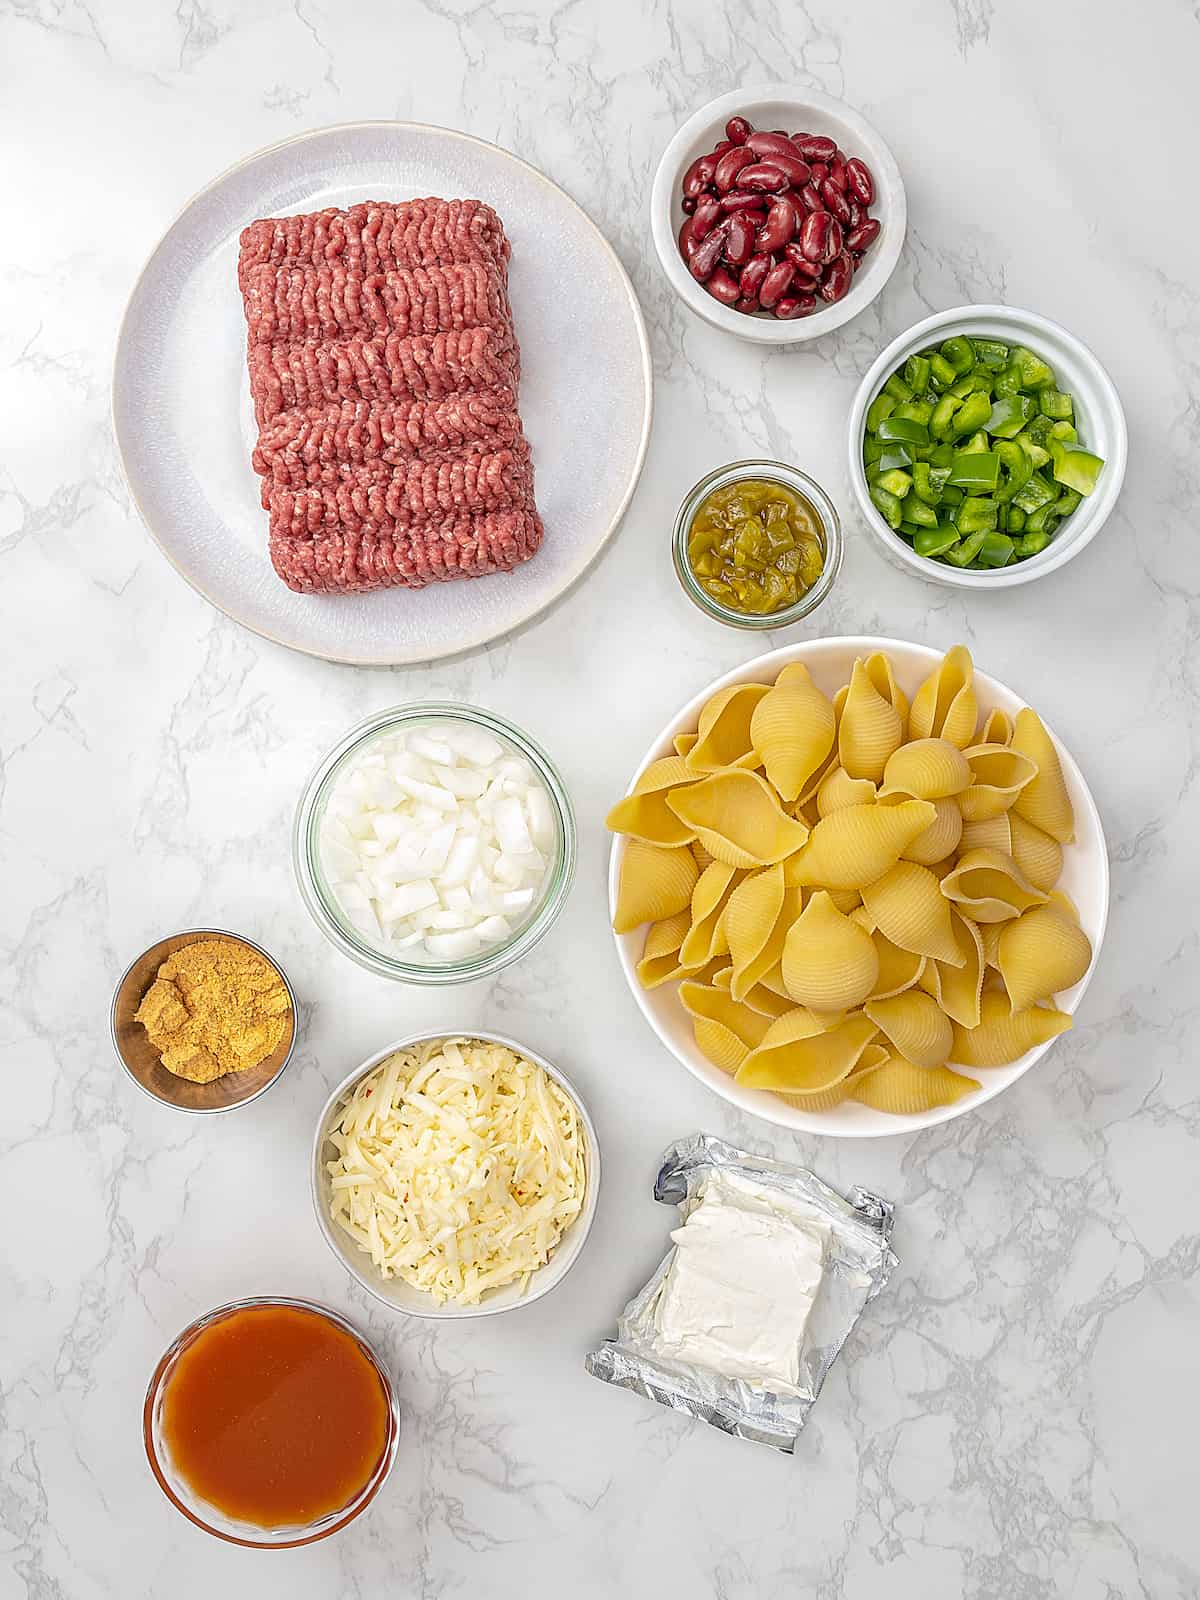 Overhead view of ingredients for taco stuffed shells